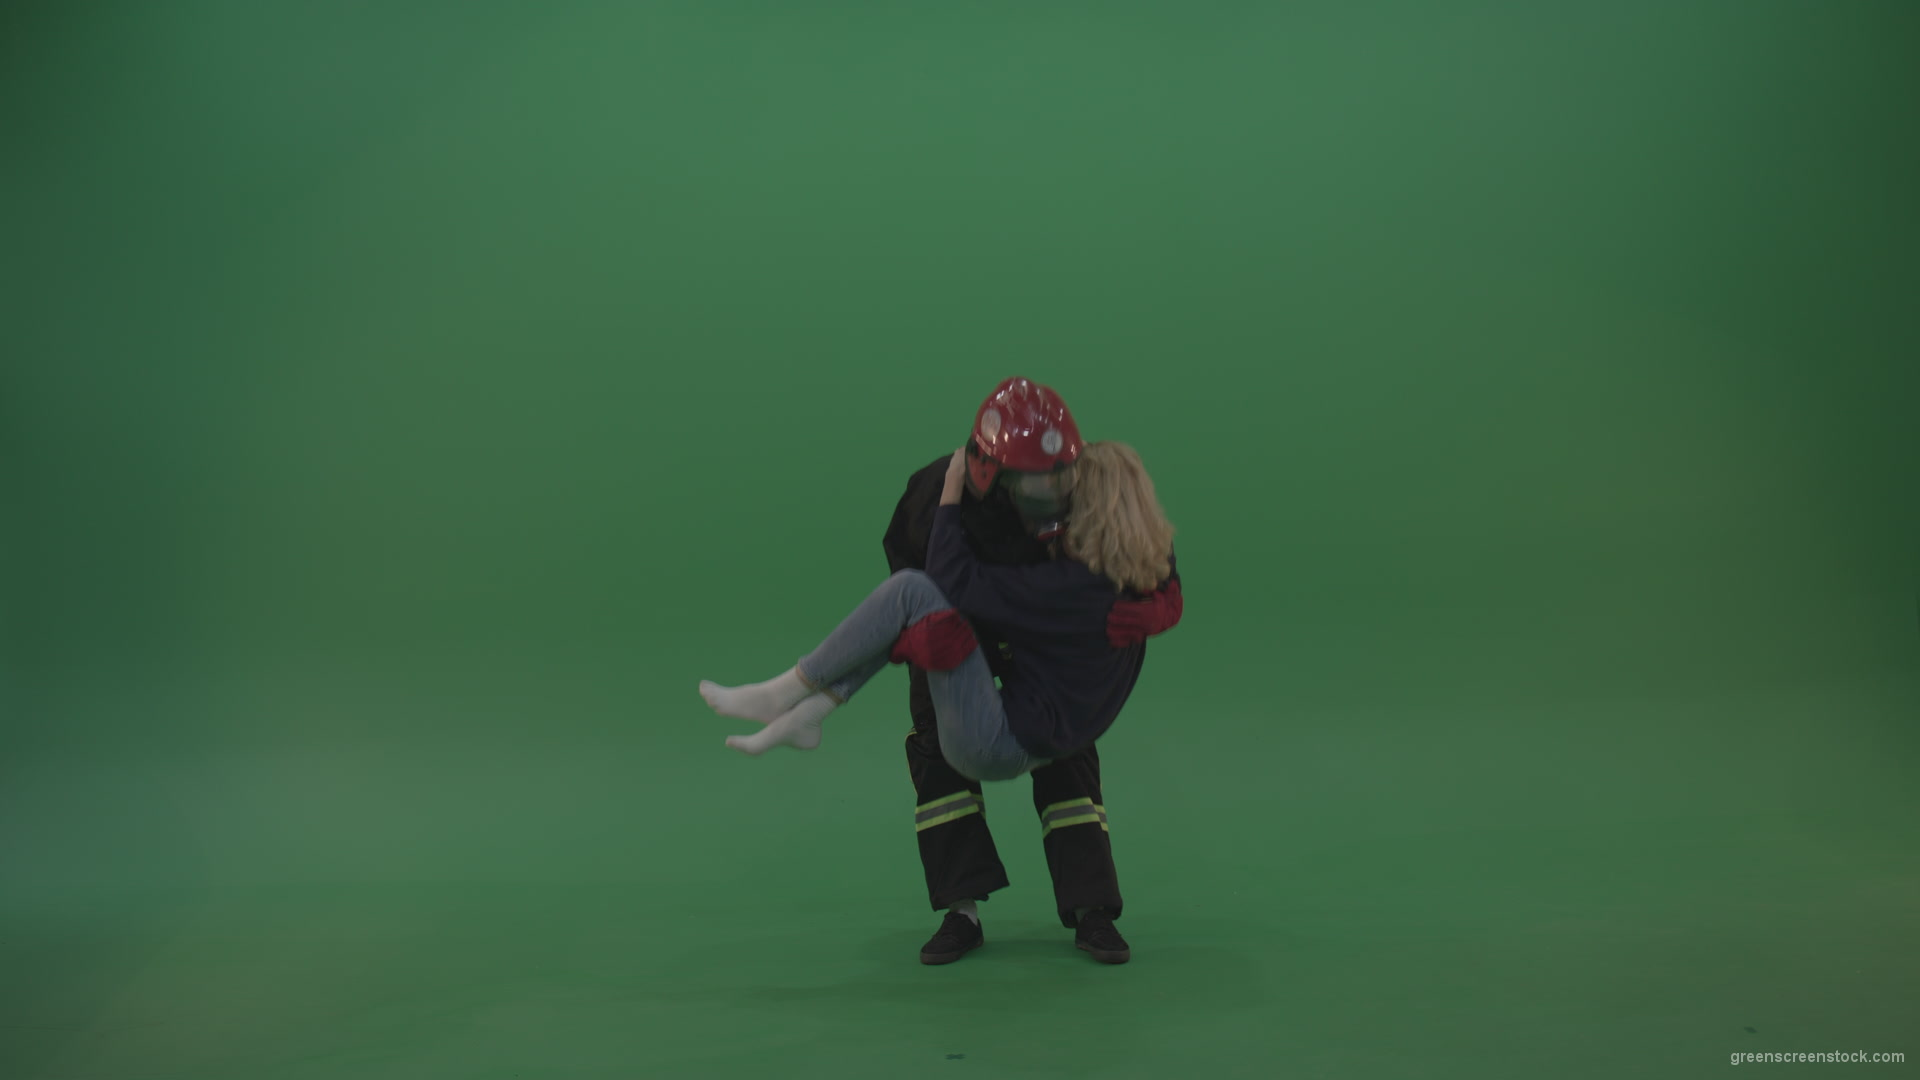 Brave_Fireman_Runs_To_Unconscious_Young_Victim_Girl_Slightly_Wakes_Her_Up_Takes_On_Strong_Hands_And_Carries_Towards_Safety_On_Green_Screen_Wall_Background_007 Green Screen Stock